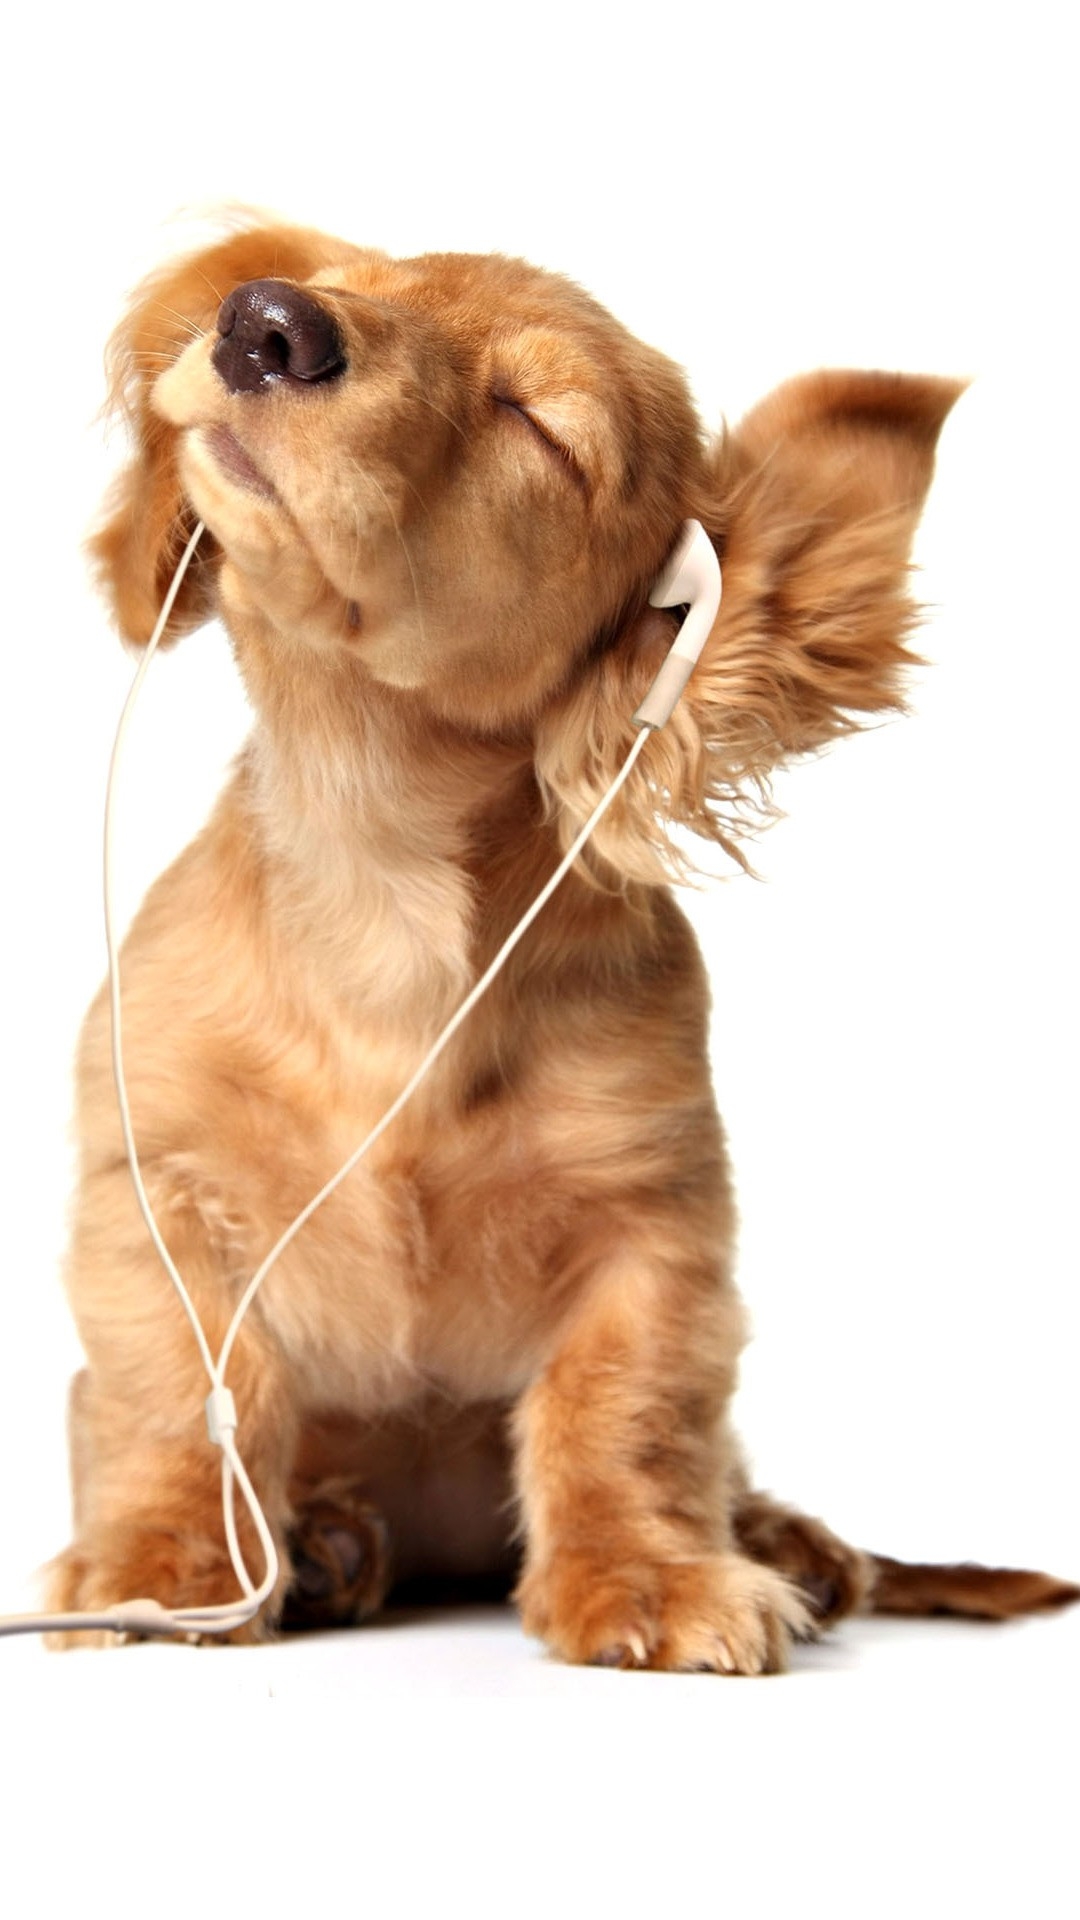 Dog Listen To Music Iphone Wallpapers